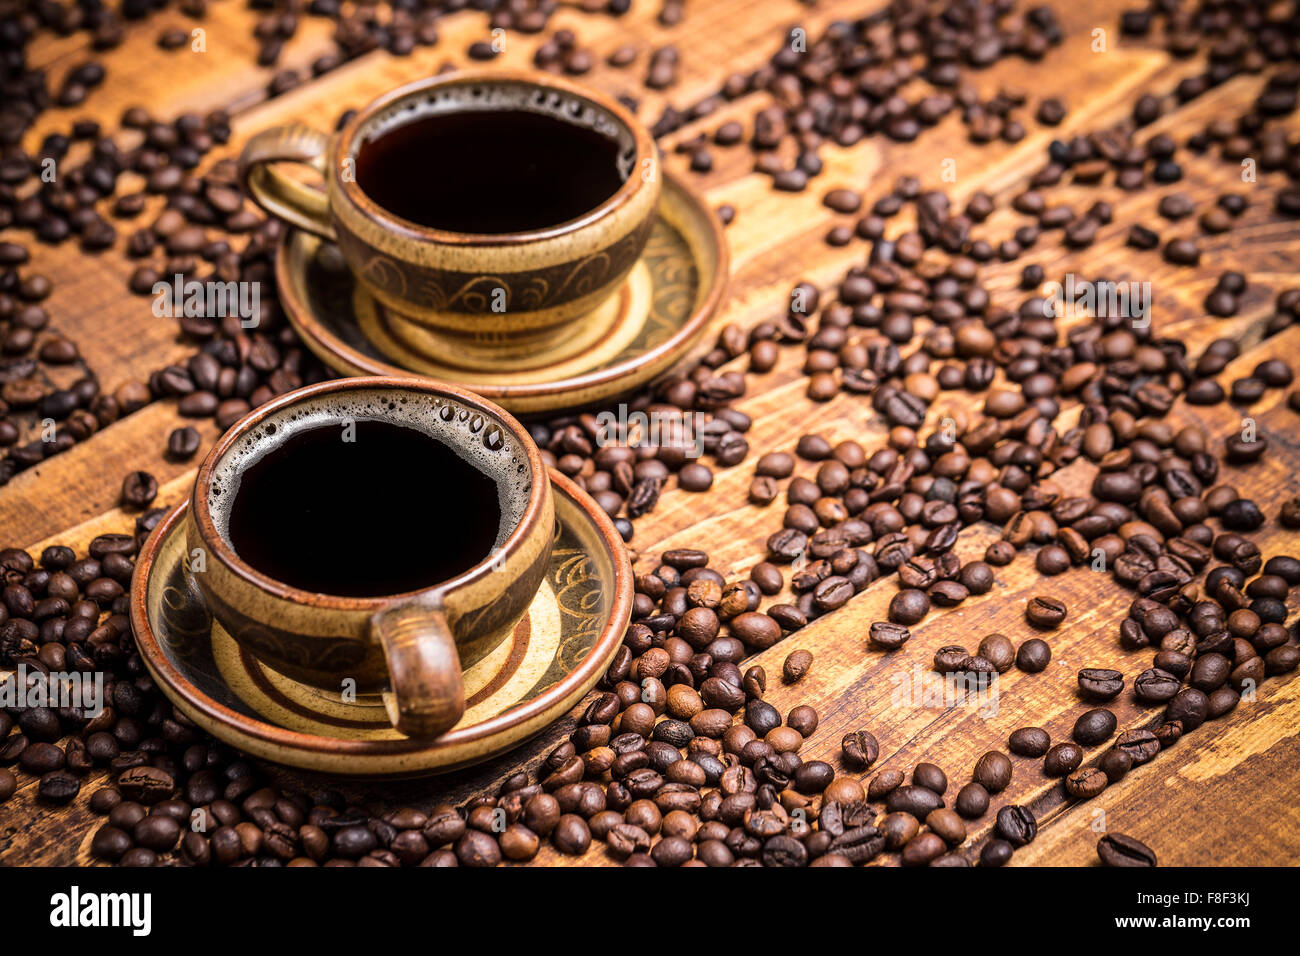 Cups of coffee on wooden table with scattered beans Stock Photo